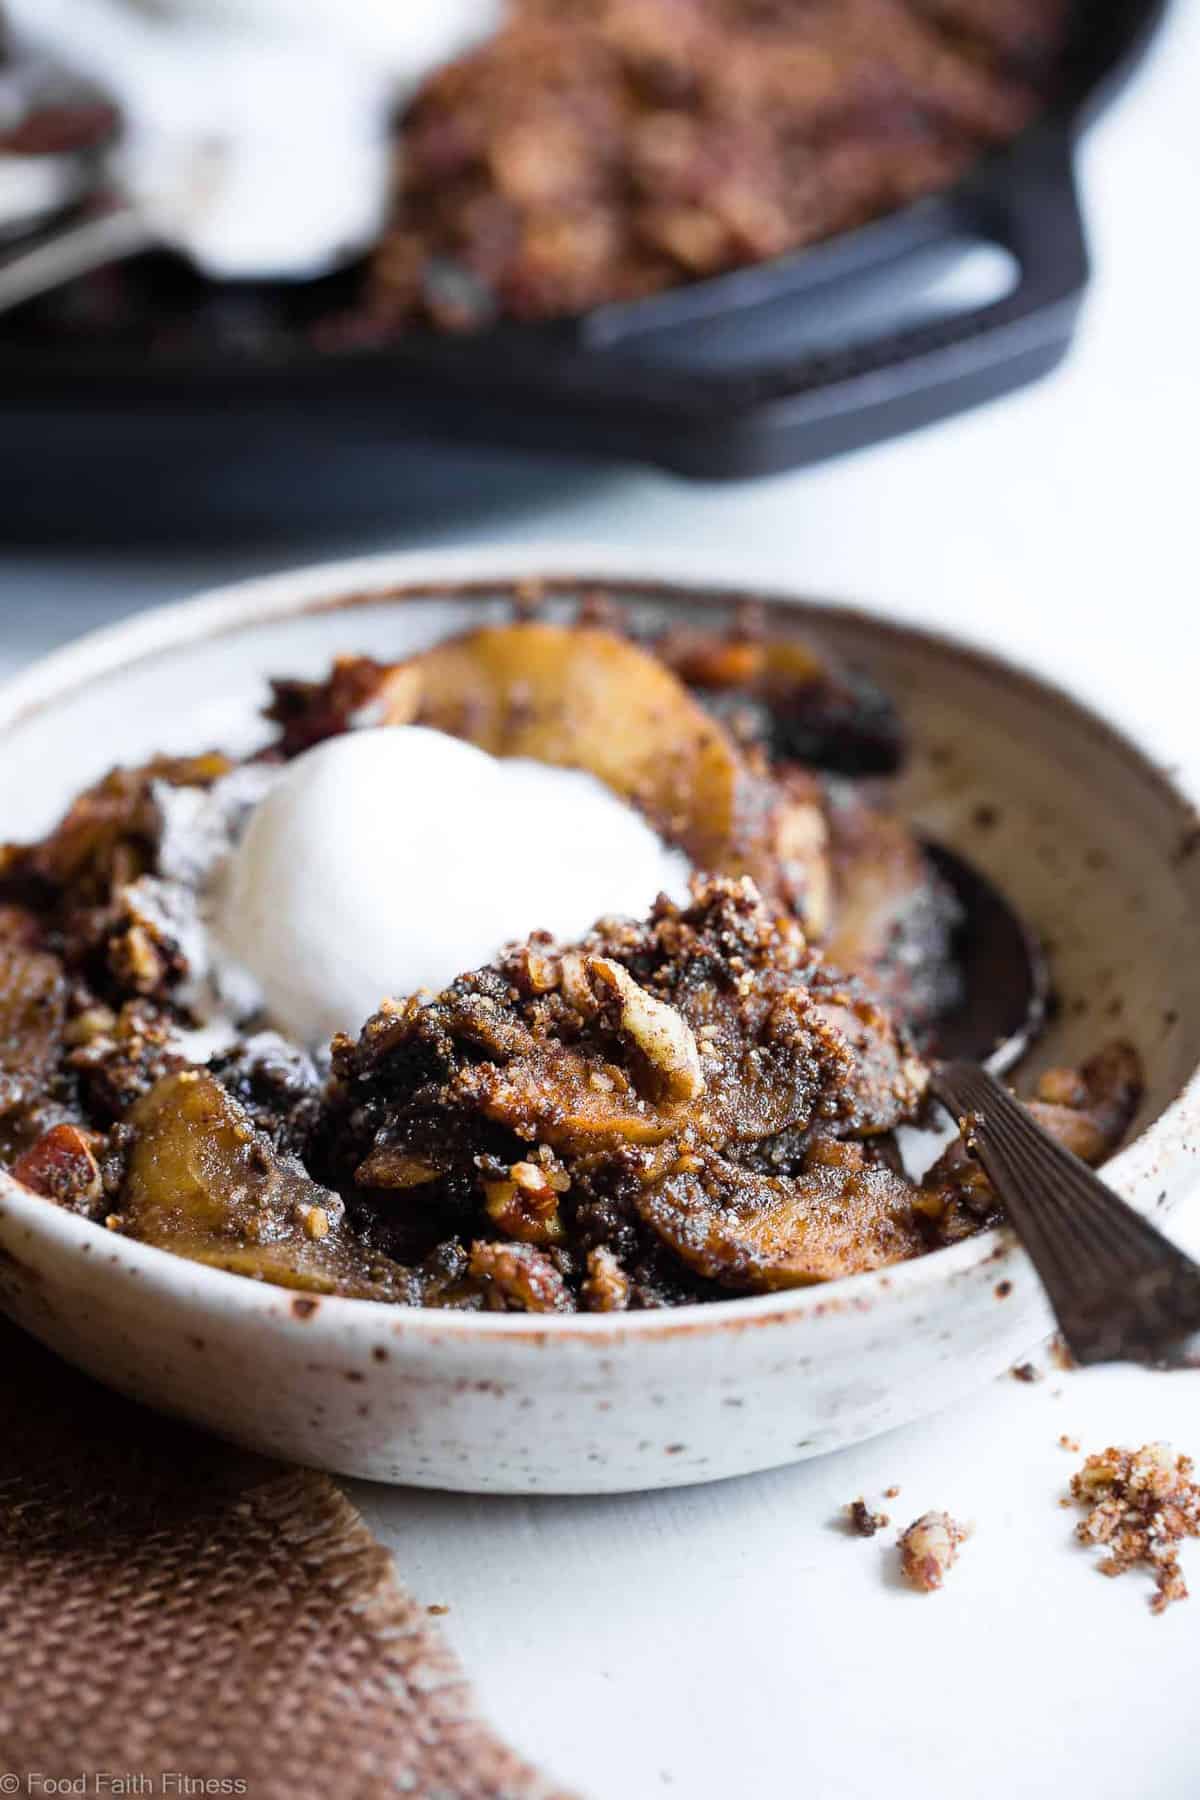 The BEST Paleo Vegan Apple Crisp - An EASY, cozy fall dessert made with simple, wholesome ingredients! Perfectly crispy, and spicy-sweet that you won't believe it's gluten free, dairy free and better for you! | #Foodfaithfitness | #Vegan #Paleo #Healthy #Glutenfree #Dairyfree